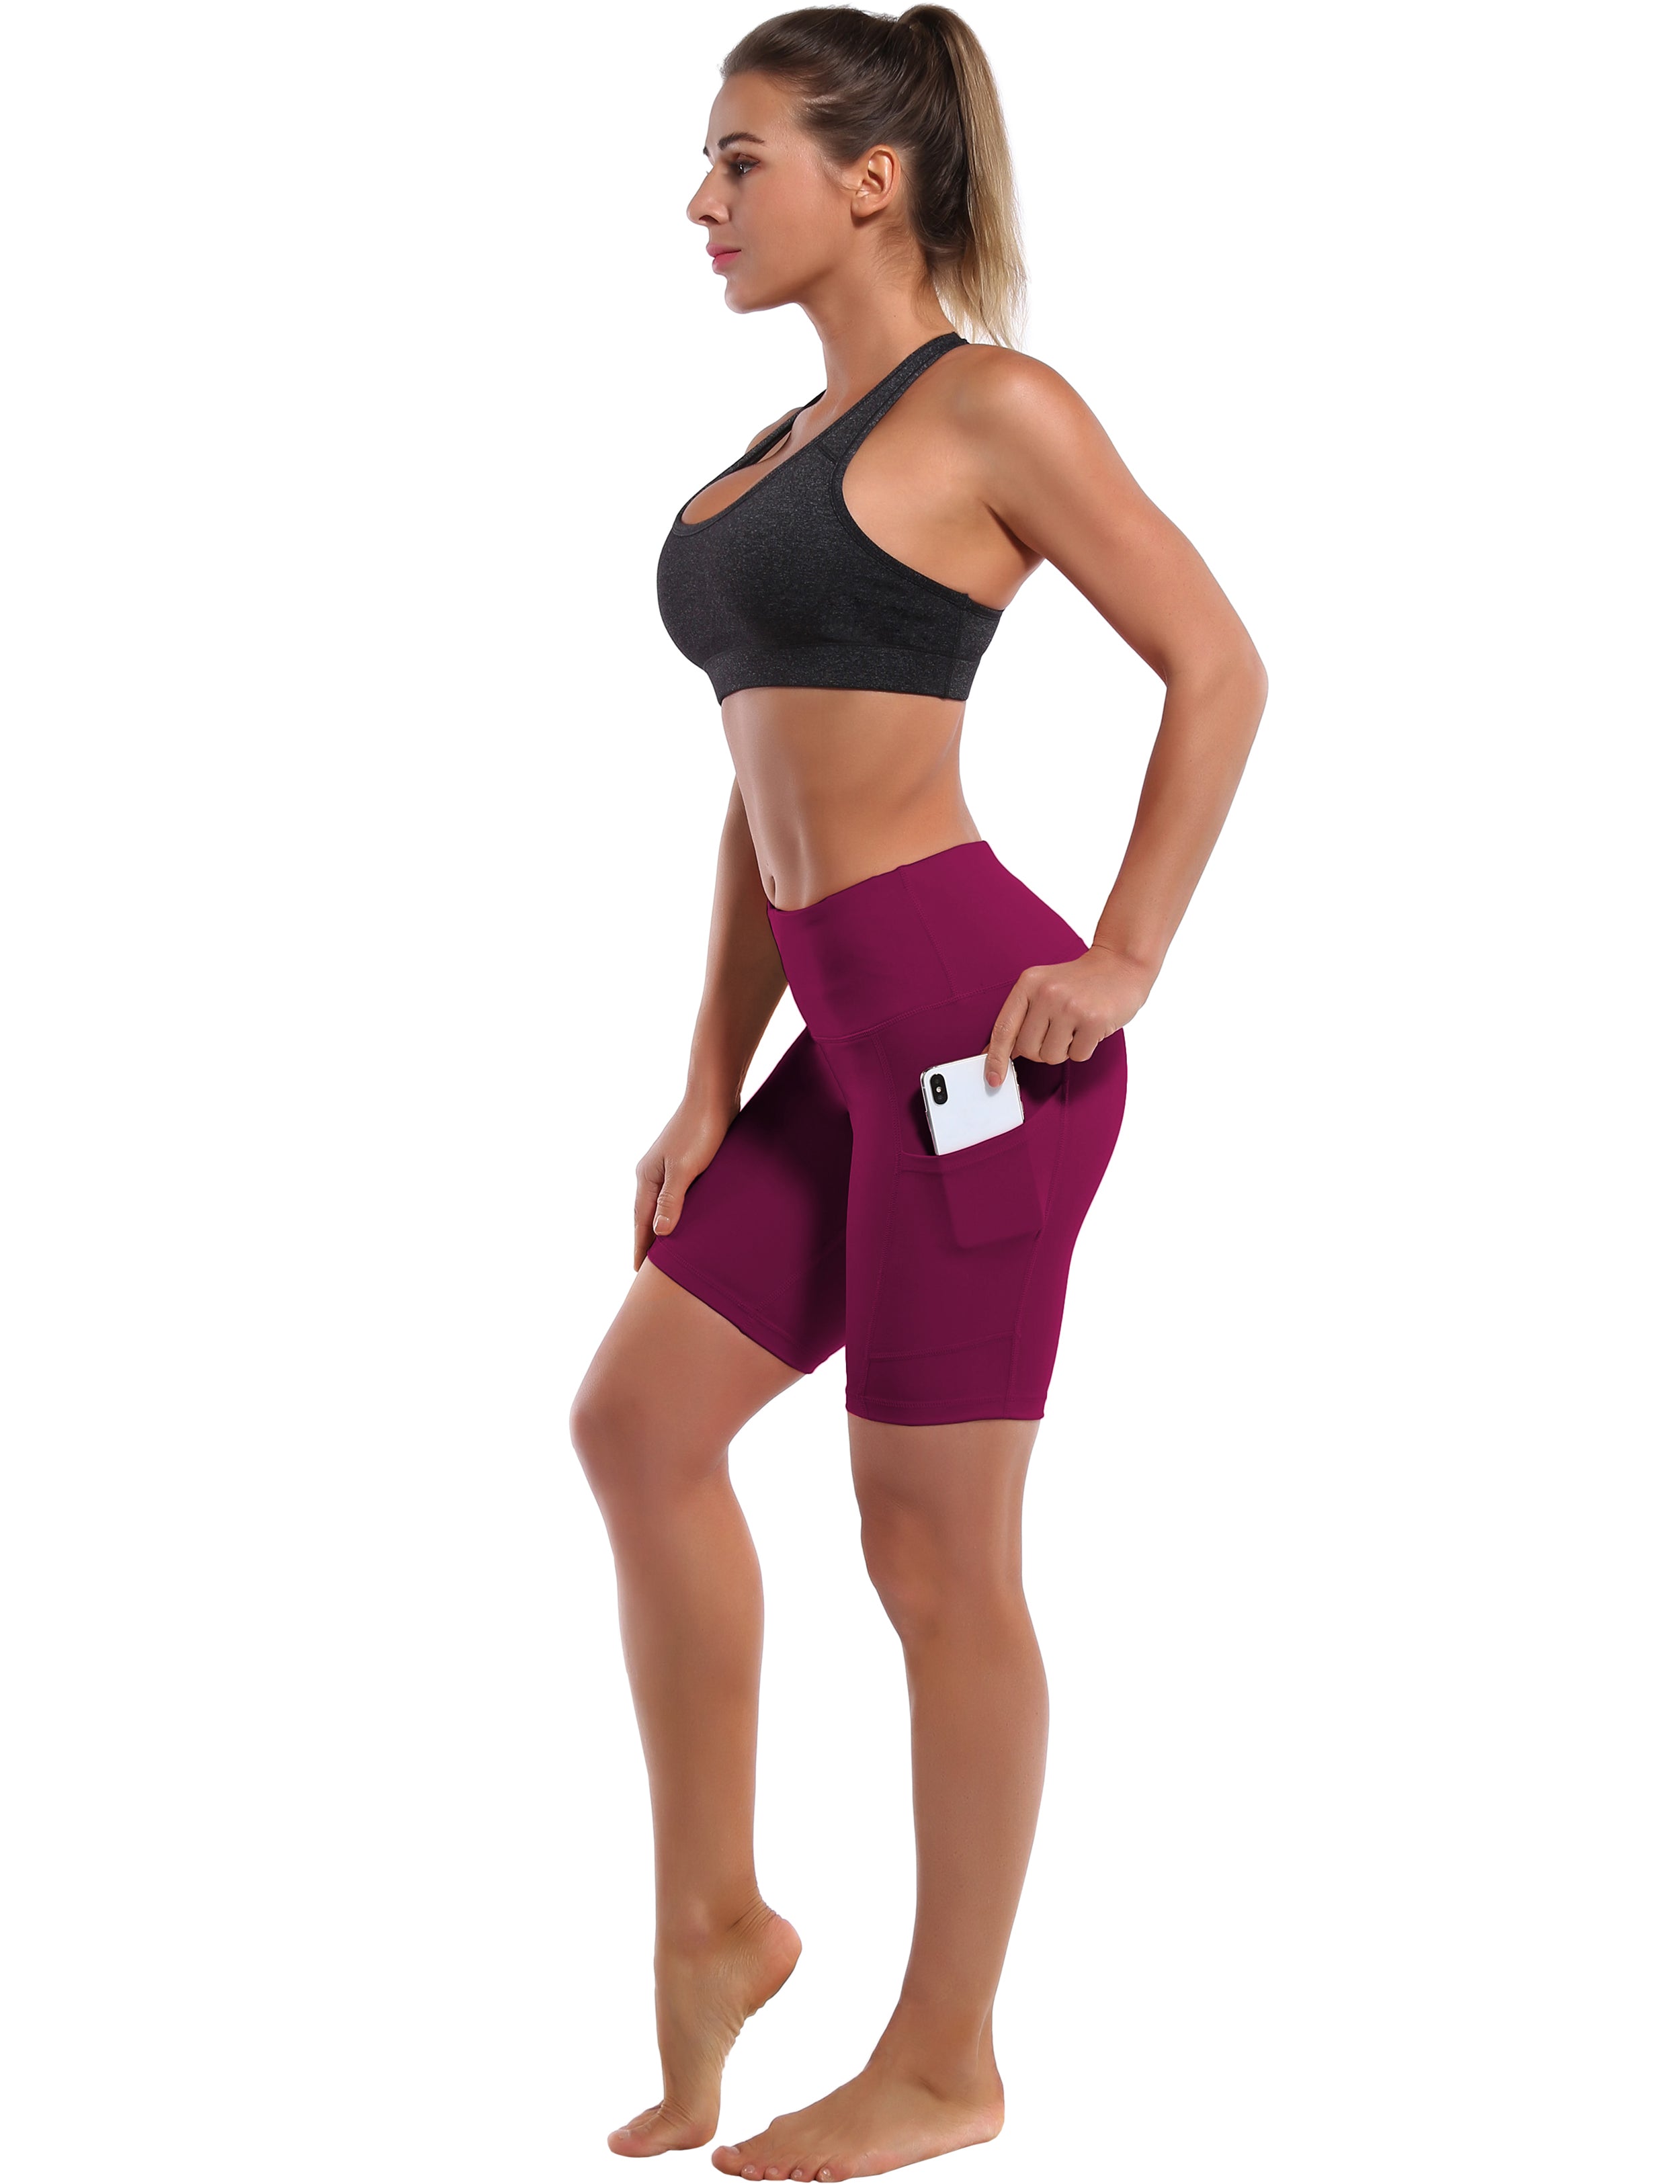 8" Side Pockets Jogging Shorts grapevine Sleek, soft, smooth and totally comfortable: our newest style is here. Softest-ever fabric High elasticity High density 4-way stretch Fabric doesn't attract lint easily No see-through Moisture-wicking Machine wash 75% Nylon, 25% Spandex